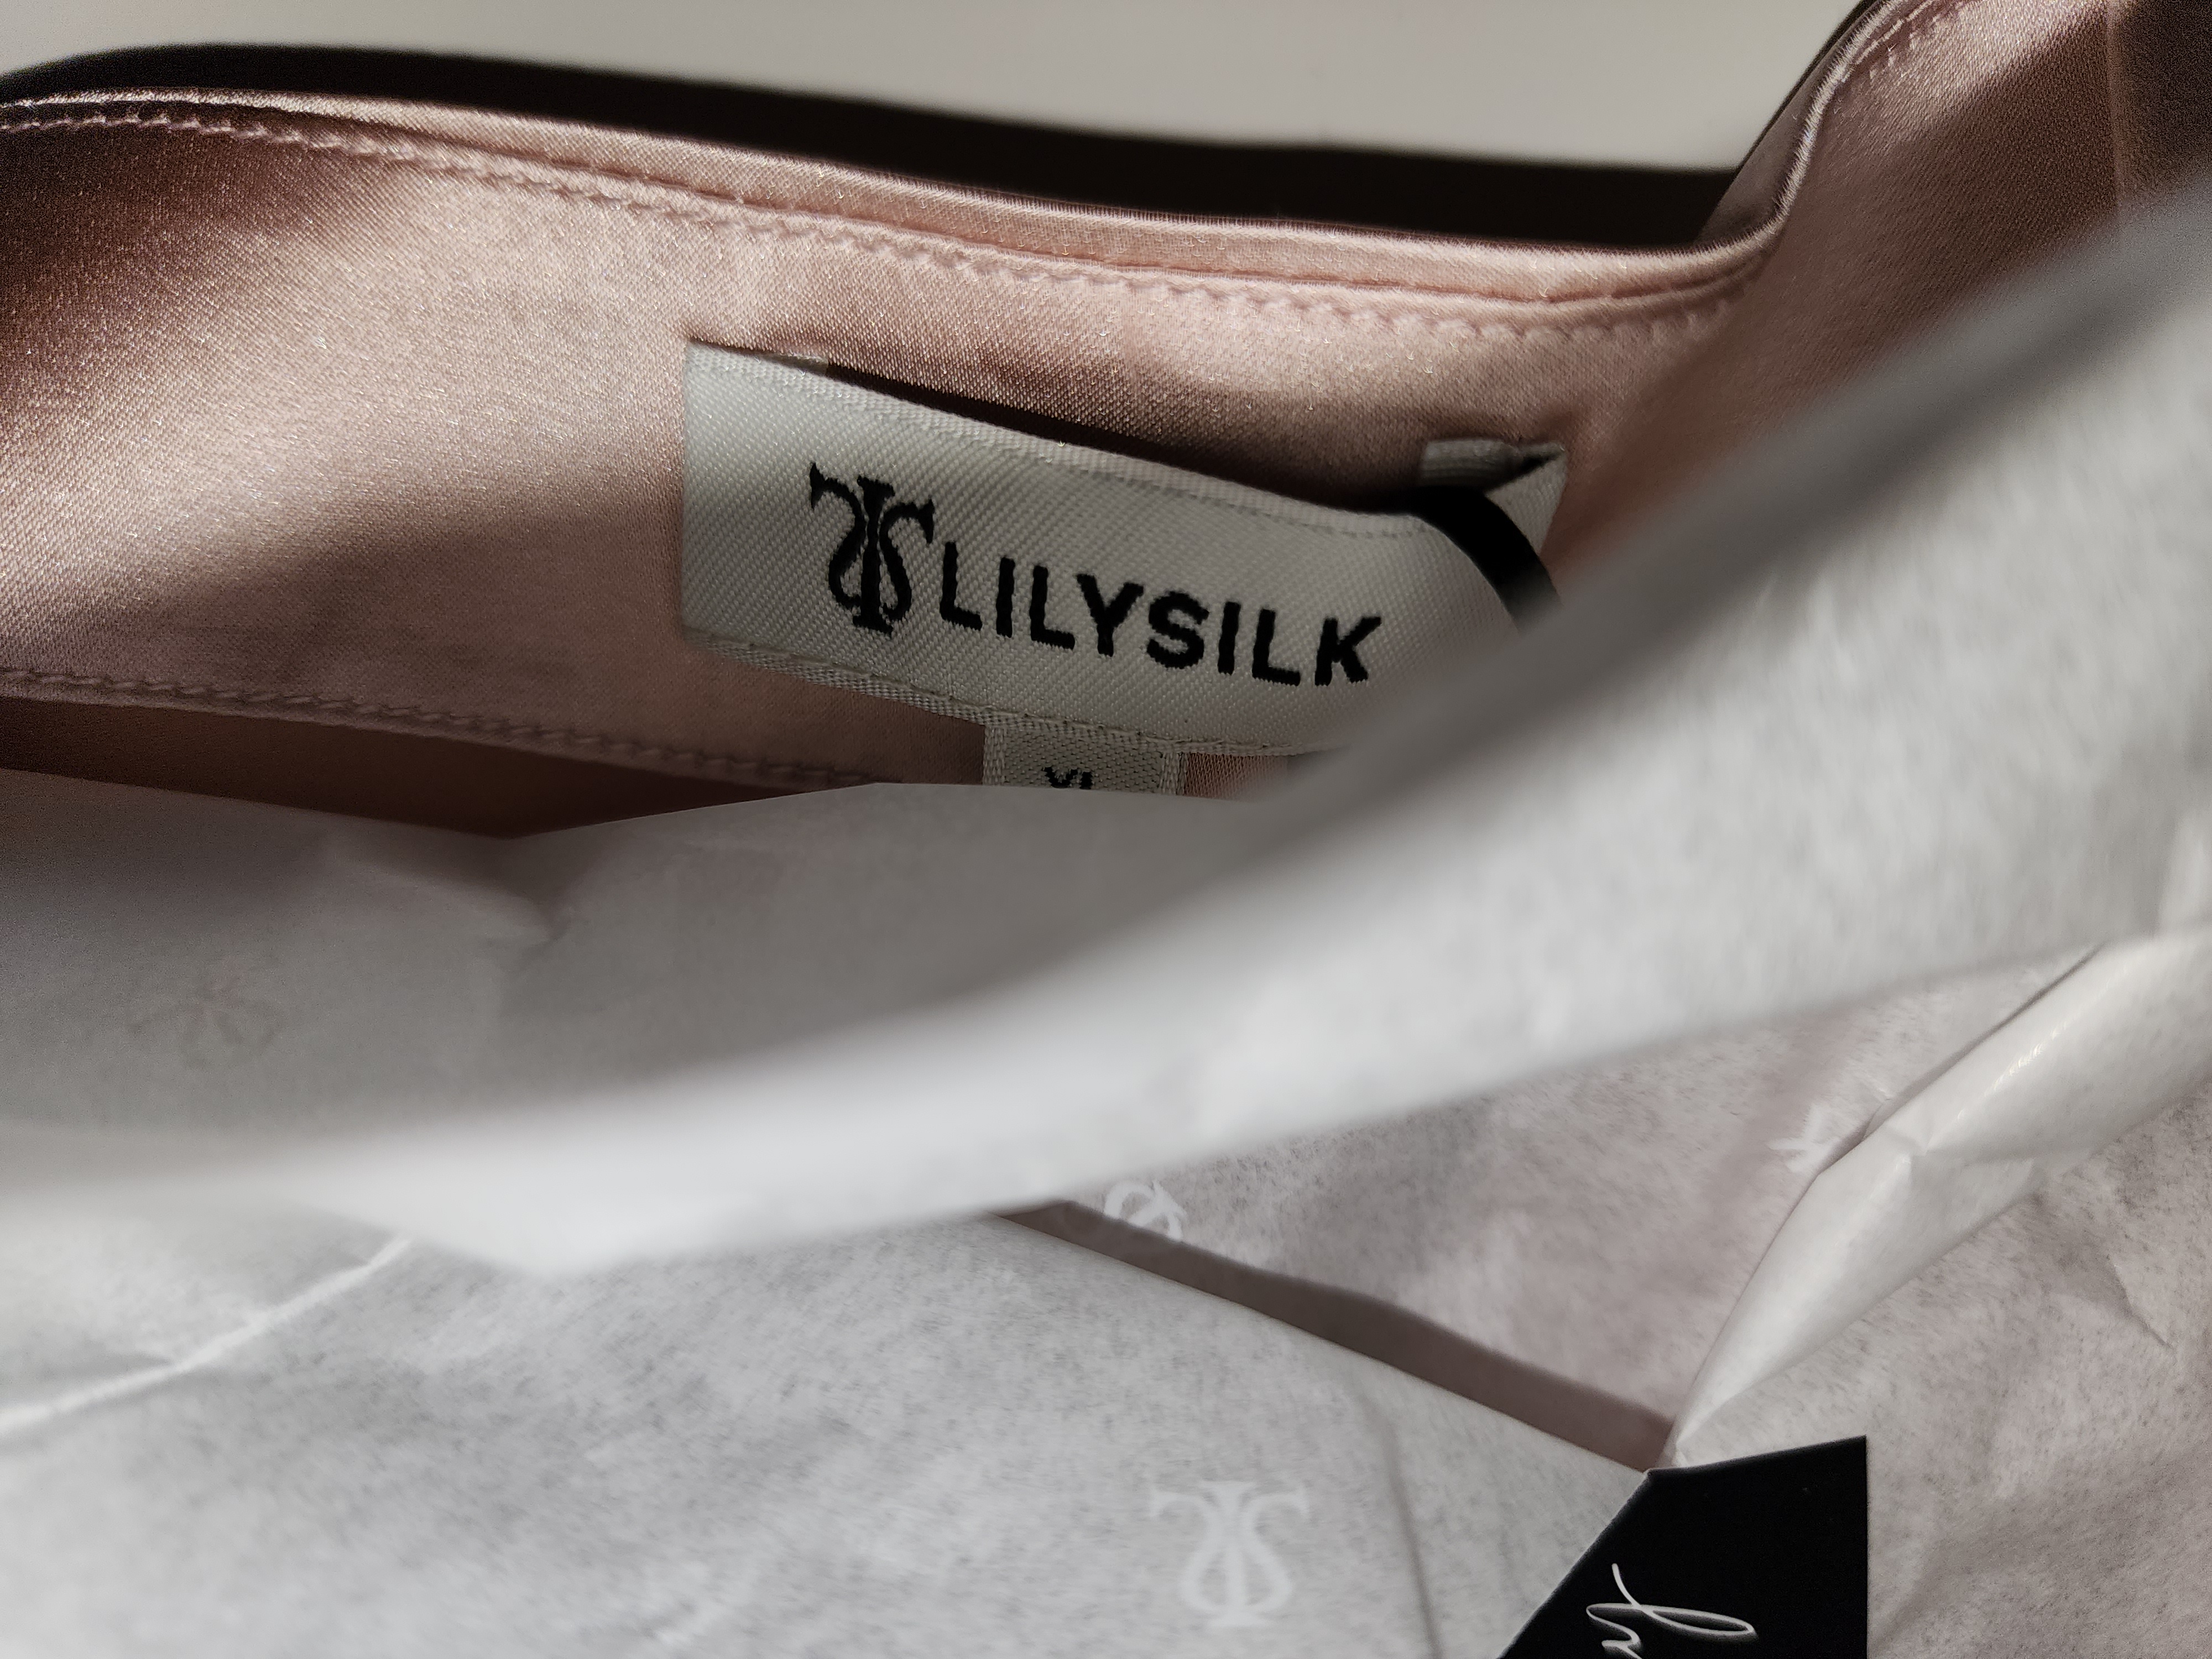 An Unbiased Honest Lilysilk Review - Life with Mar